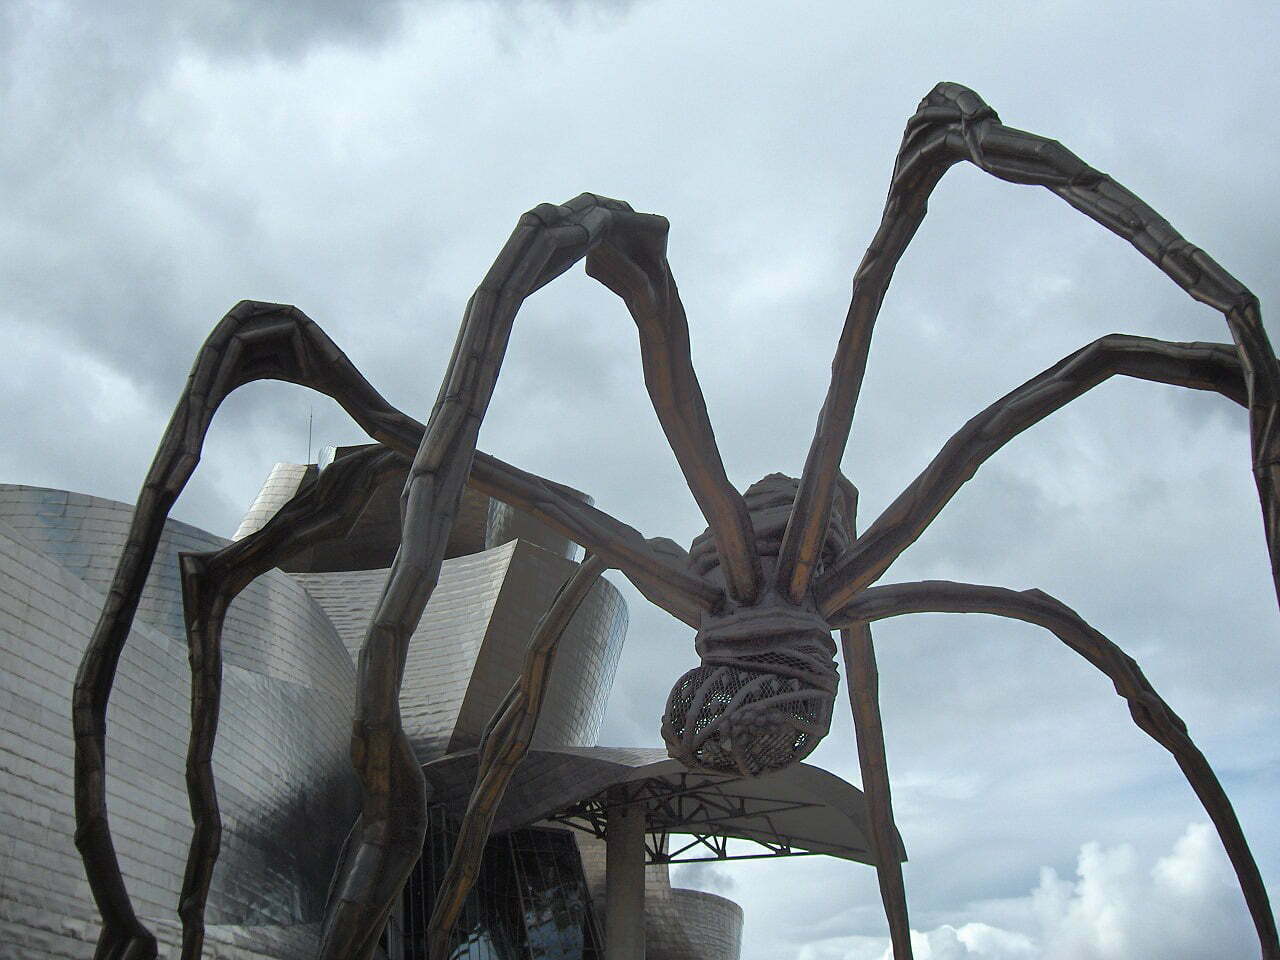 Maman, a huge spider by Louise Bourgeois outside the Guggenheim museum in Bilbao, Spain 15 September 2006 Own work Georges Jansoone, Retriever